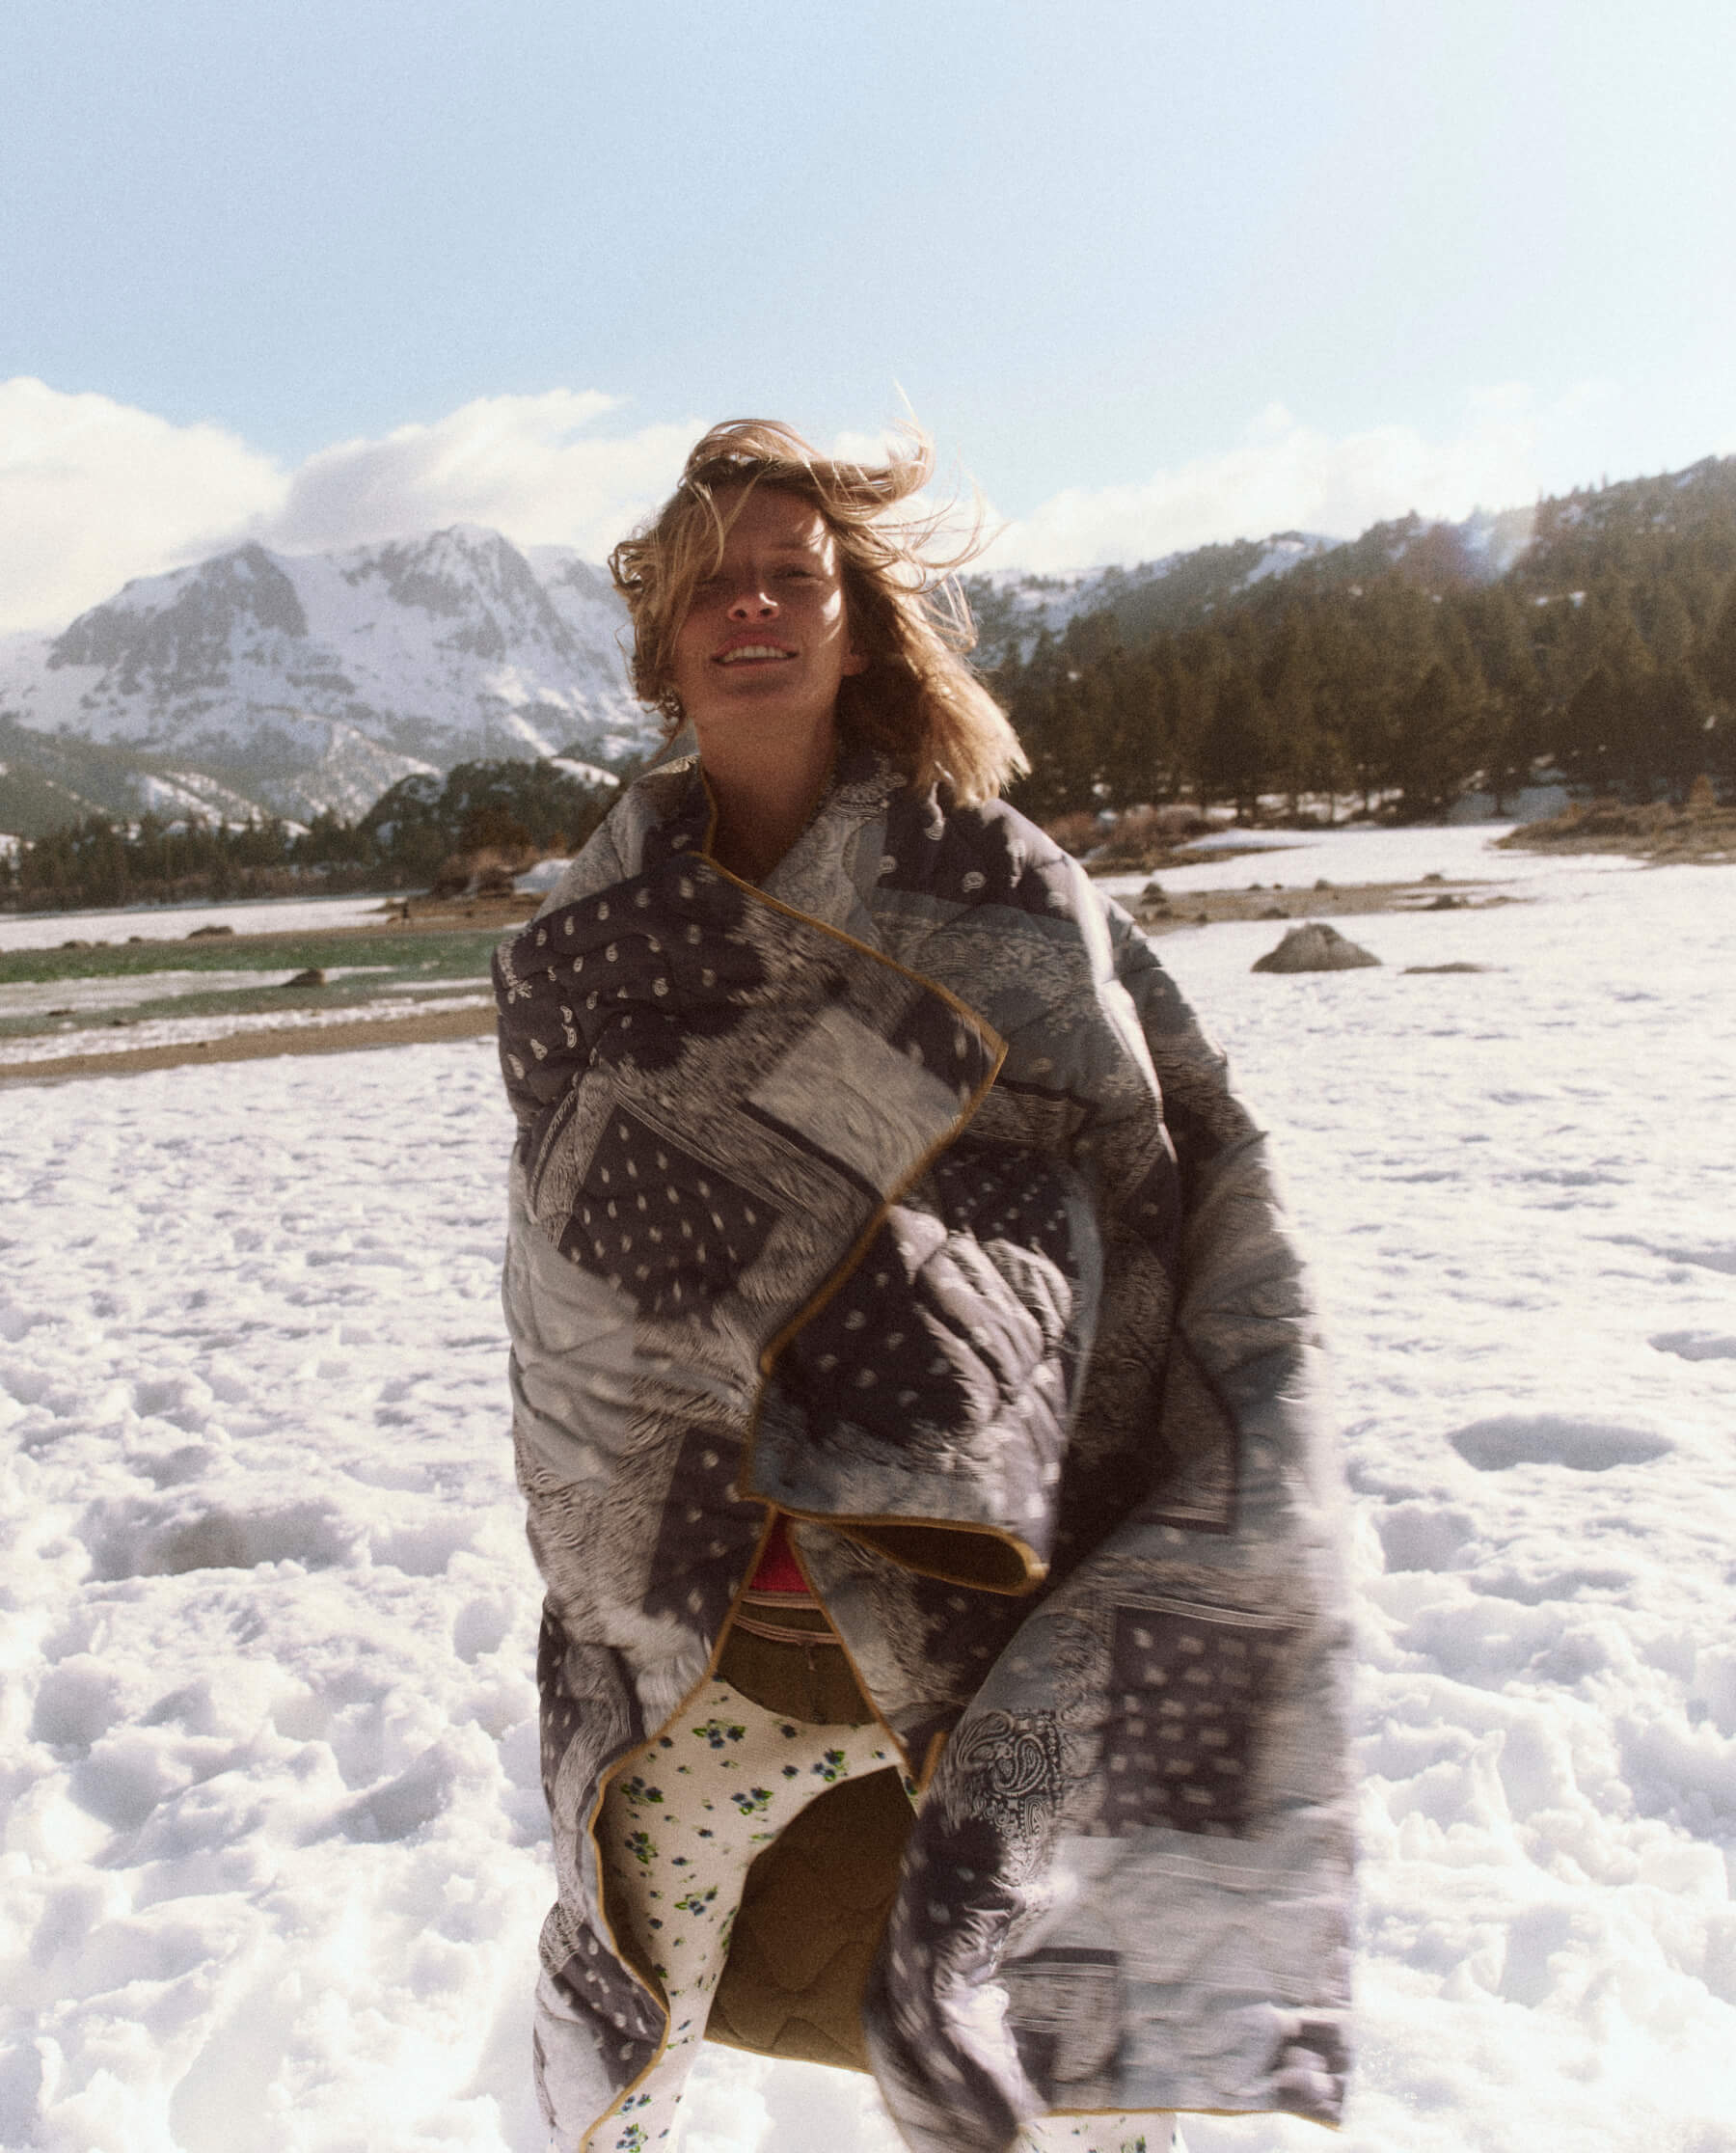 The Wearable Reversible Puffer Blanket. -- Patchwork Bandana and Evergreen BLANKETS THE GREAT. FALL 23 TGO SALE